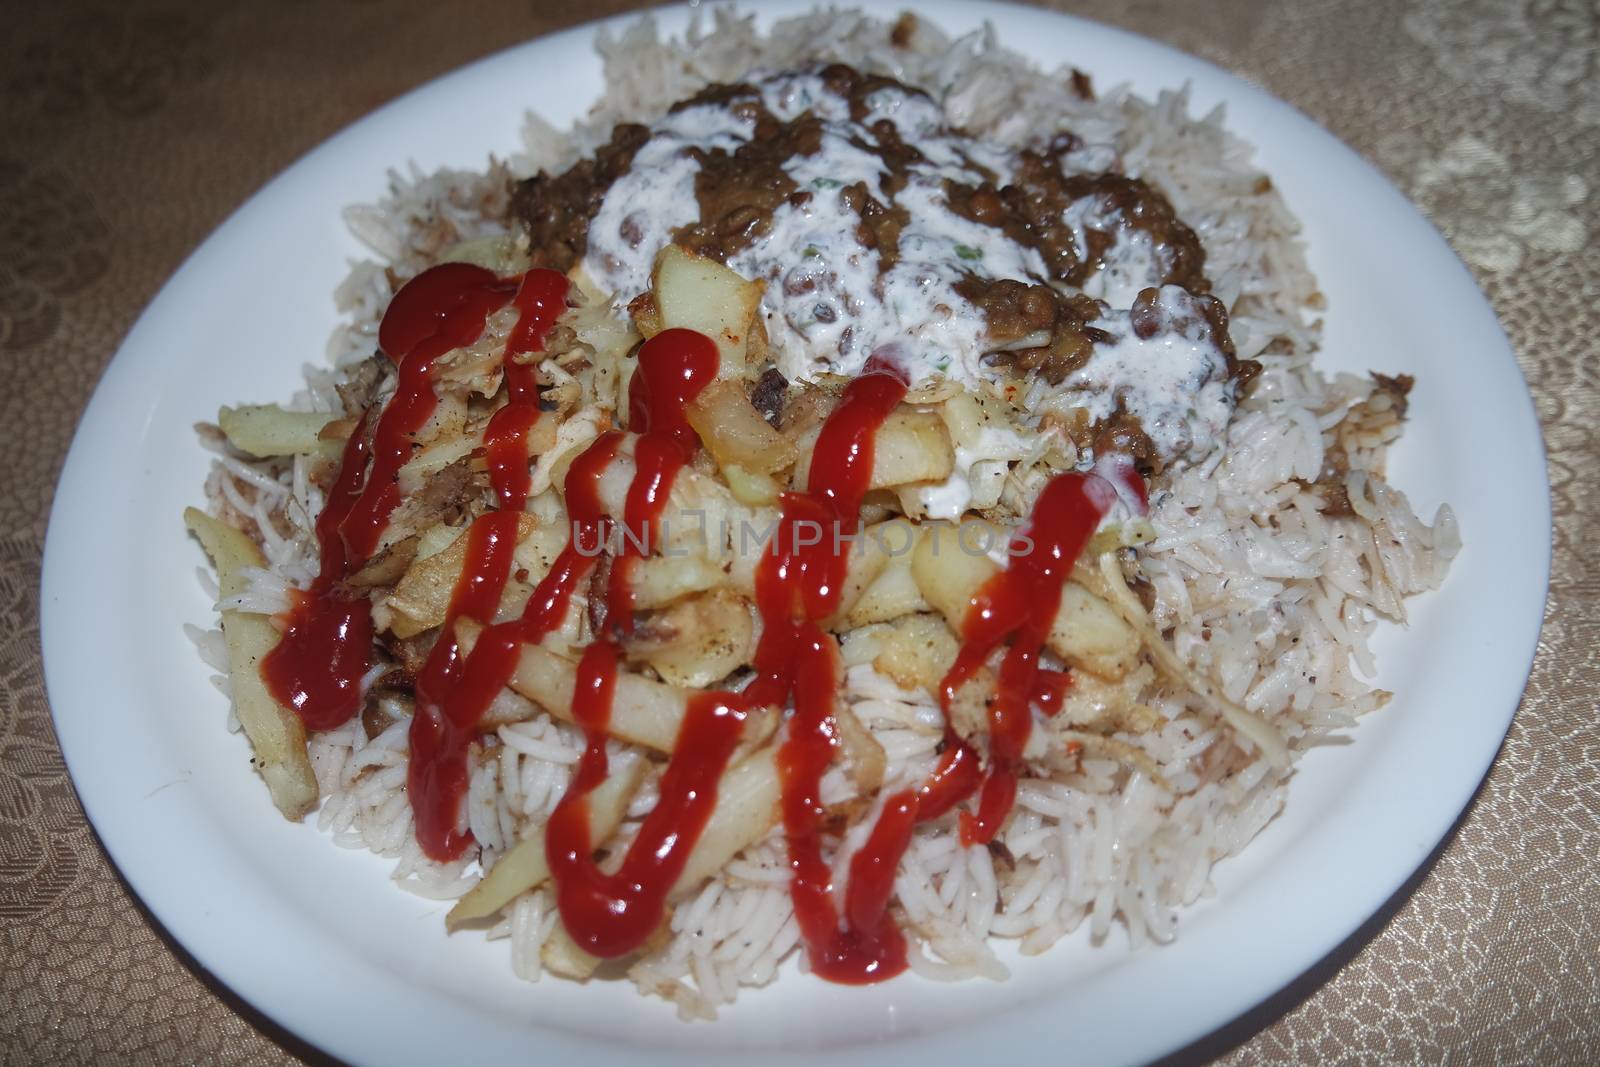 Delicious traditional dish of rice with potato fries and cereals with red ketchup. Food background with copy space for text and advertisements.